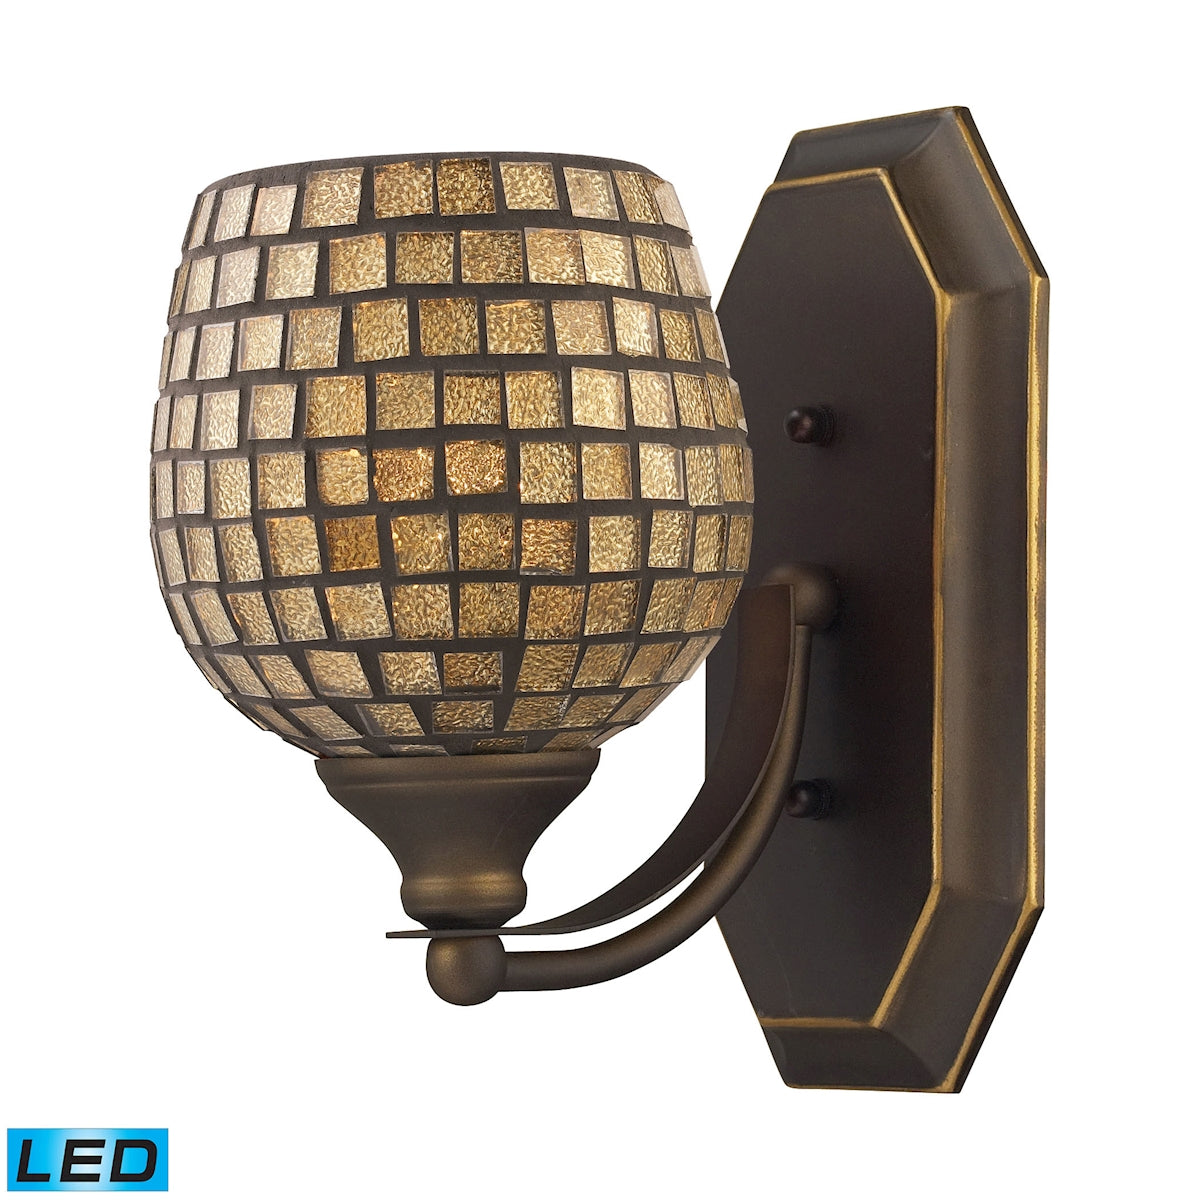 ELK Lighting 570-1B-GLD-LED Mix-N-Match Vanity 1-Light Wall Lamp in Aged Bronze with Gold Leaf Glass - Includes LED Bulb